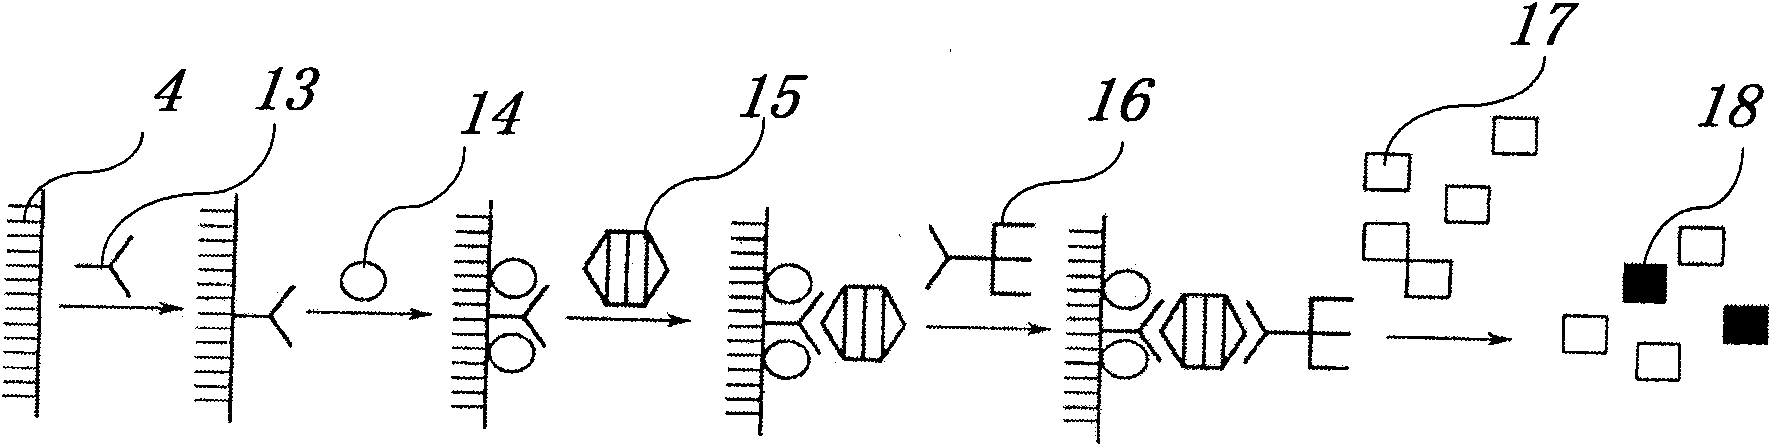 Biochemical detection method and device for dentin phosphoprotein